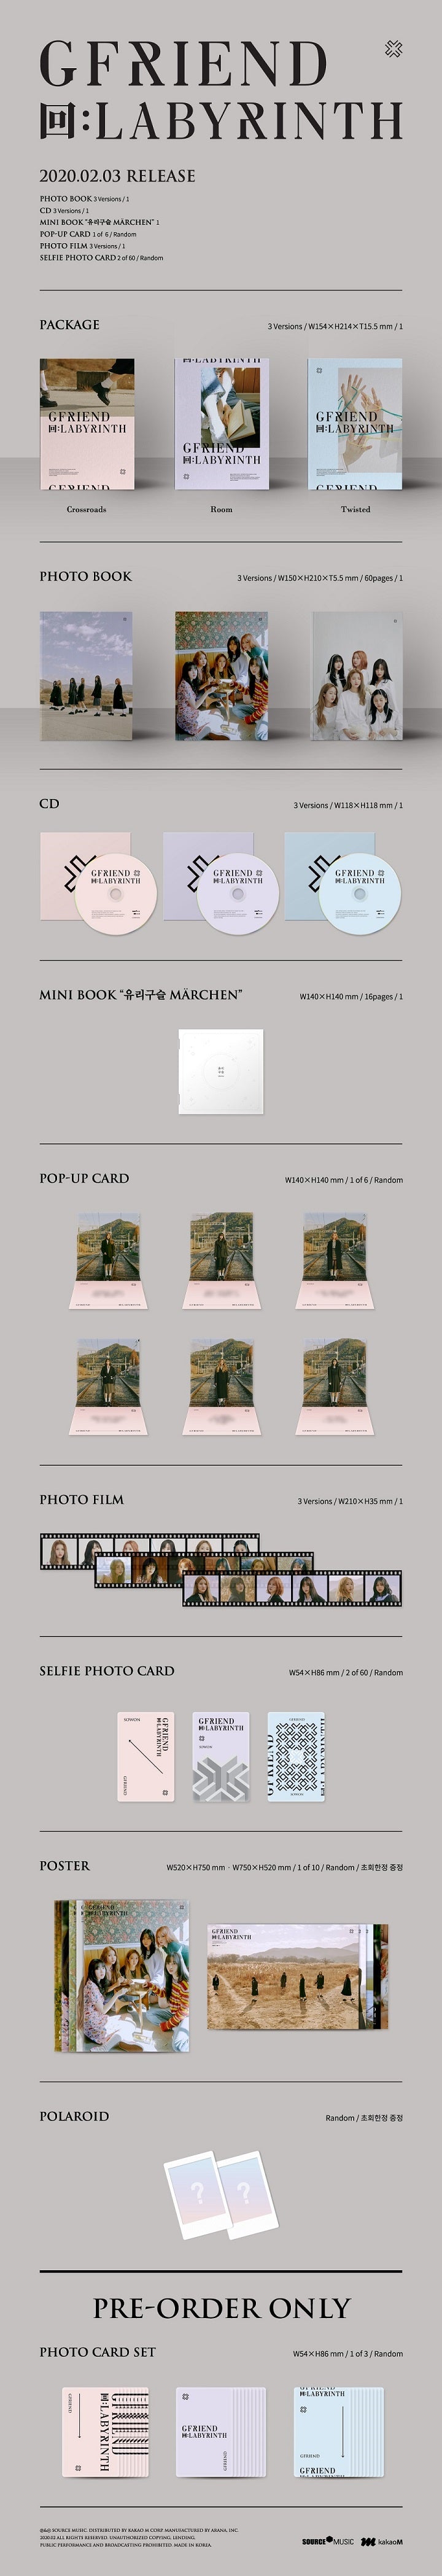 1 CD
1 Photo Book (60 pages)
1 Mini Book (16 pages)
1 Pop Up Card
1 Photo Film
2 Selfie Phohto Cards